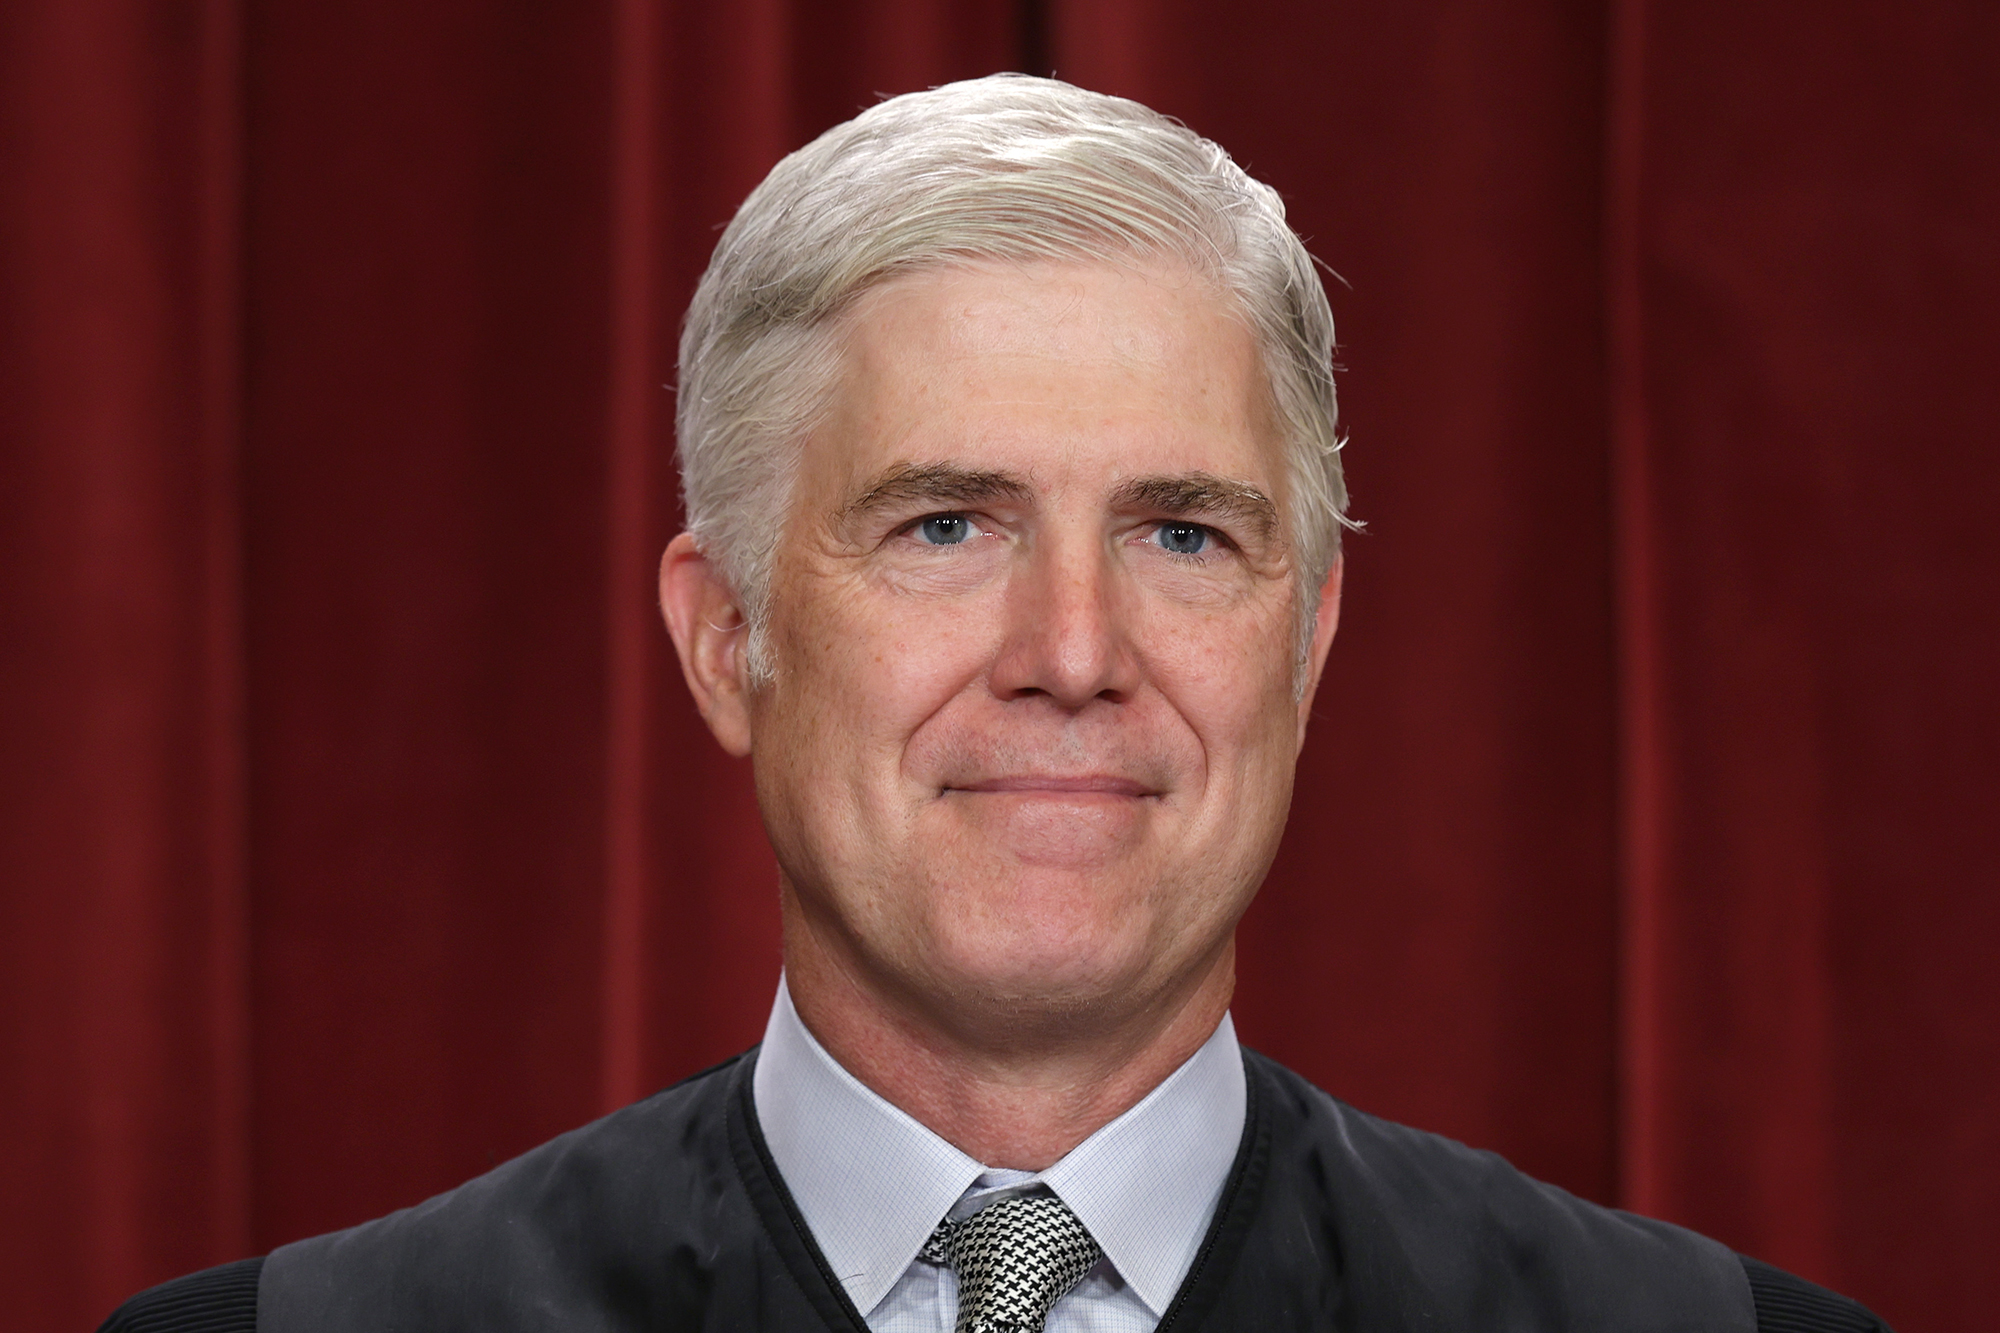 United States Supreme Court Associate Justice Neil Gorsuch poses for an official portrait at the East Conference Room of the Supreme Court building on October 7, 2022 in Washington, DC.